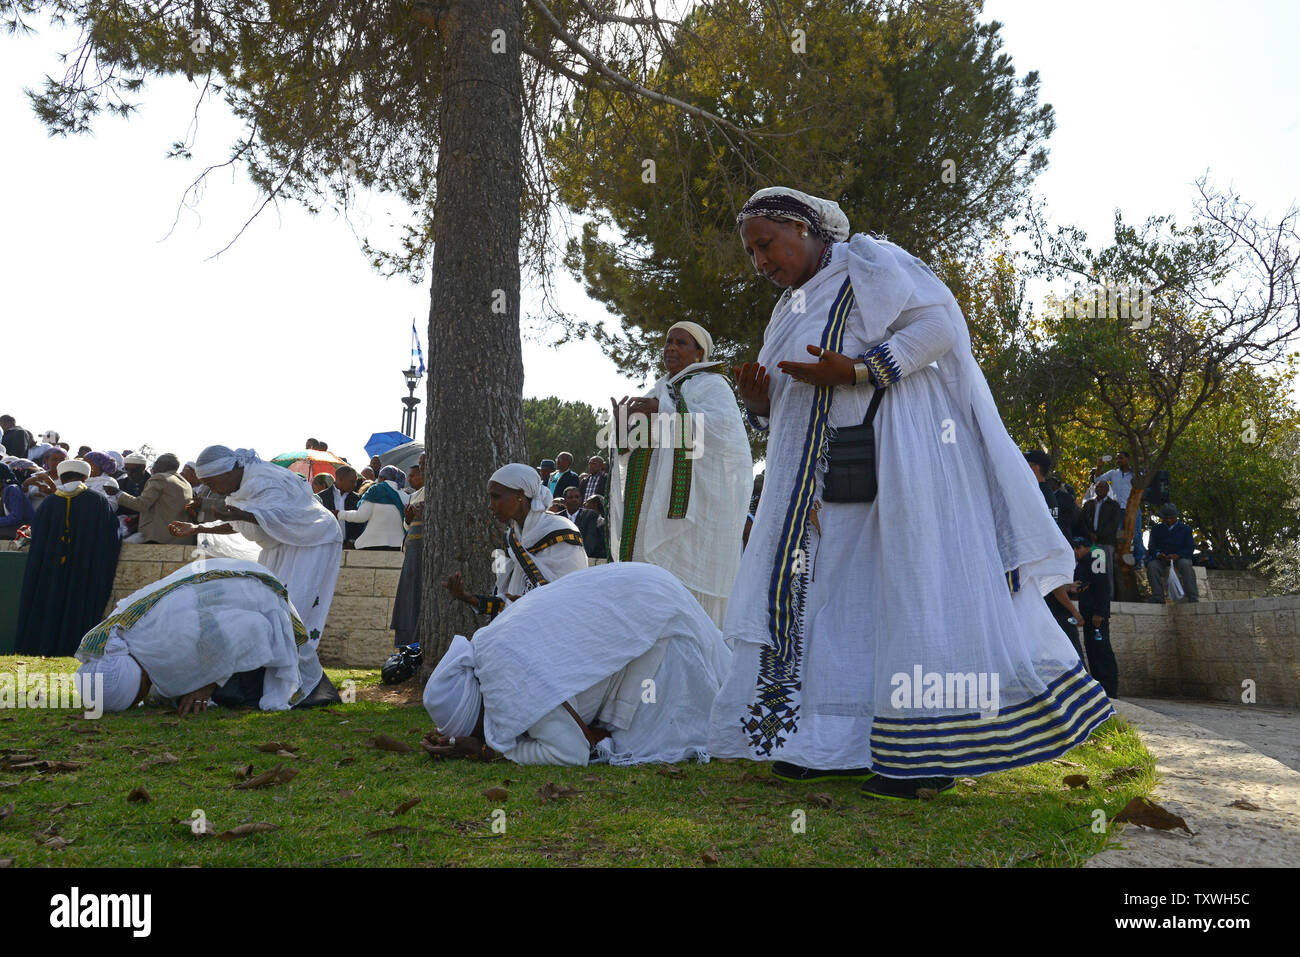 Ethiopian Jewish women pray during the Sigd holiday on a hill overlooking Jerusalem, October 31, 2013. The Sigd holiday use to mark the desire of Ethiopian Jews to return to Zion, while today thousands of Ethiopians gather  to pray and rejoice for their return to Jerusalem and  the renewal of the alliance between God, the people and the Torah.   UPI/Debbie Hill Stock Photo